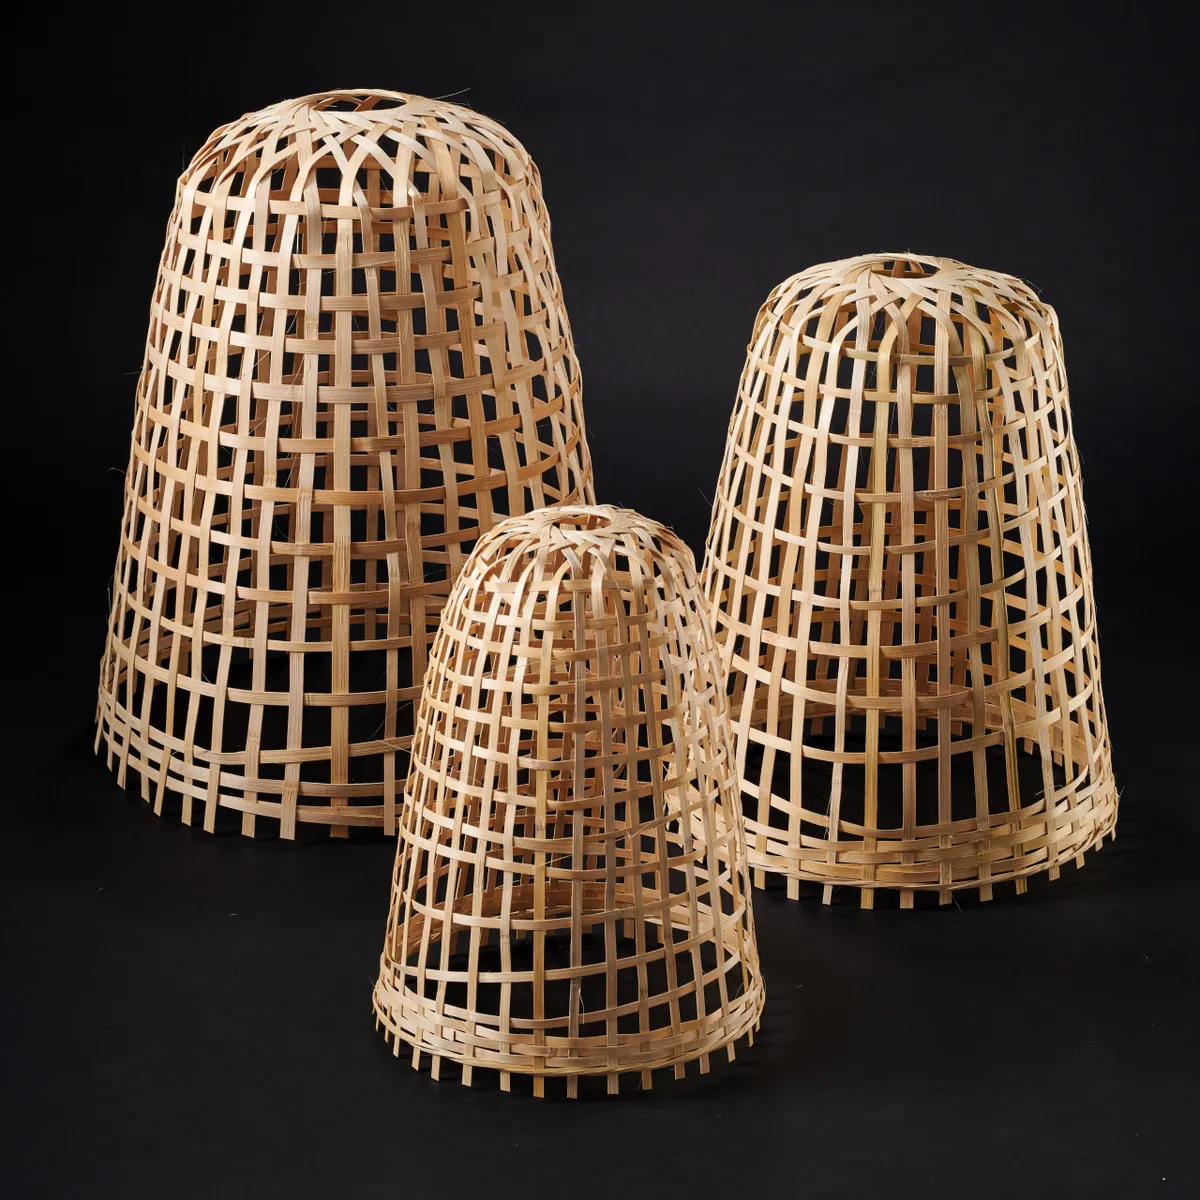 Bamboo cloches